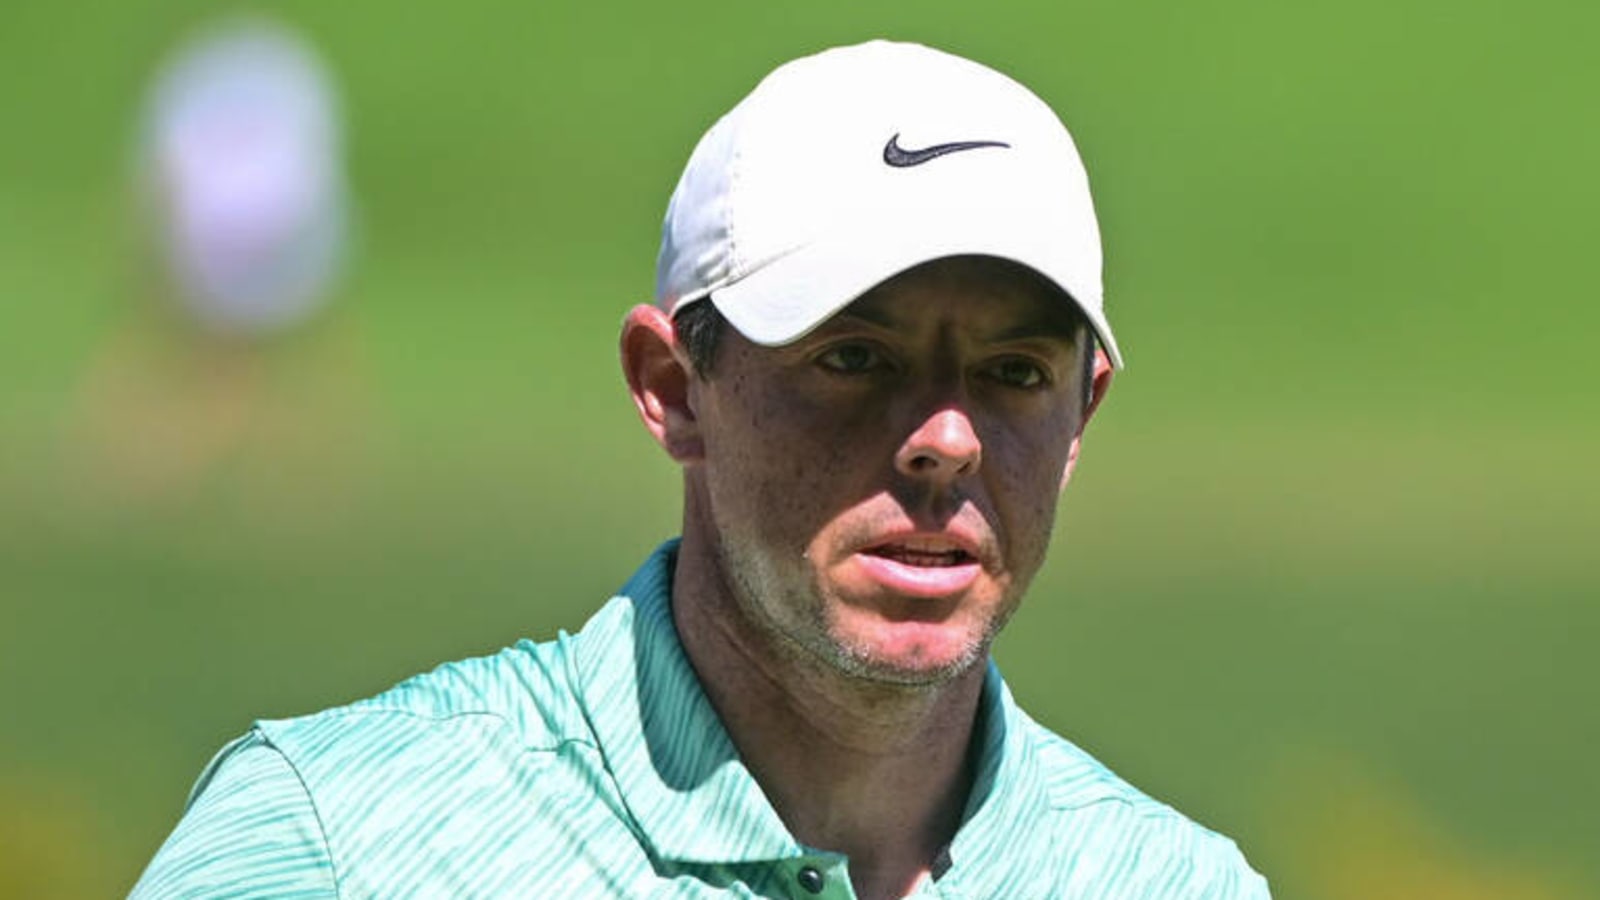 Rory McIlroy comes from behind to win Tour Championship, FedEx Cup